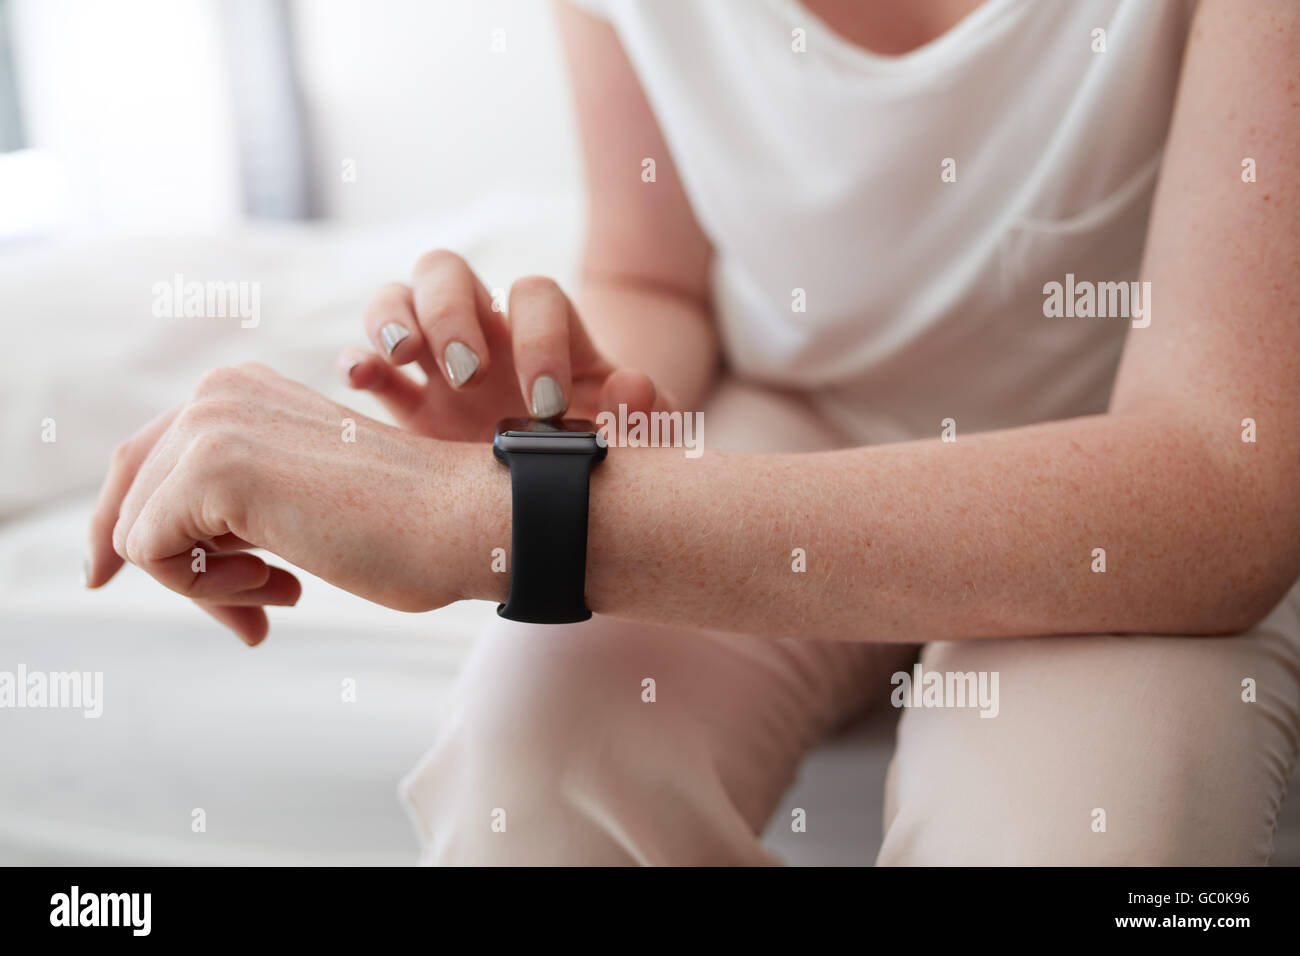 Close up image of a woman using smartwatch to check time. Hands of a female with smart watch. Stock Photo